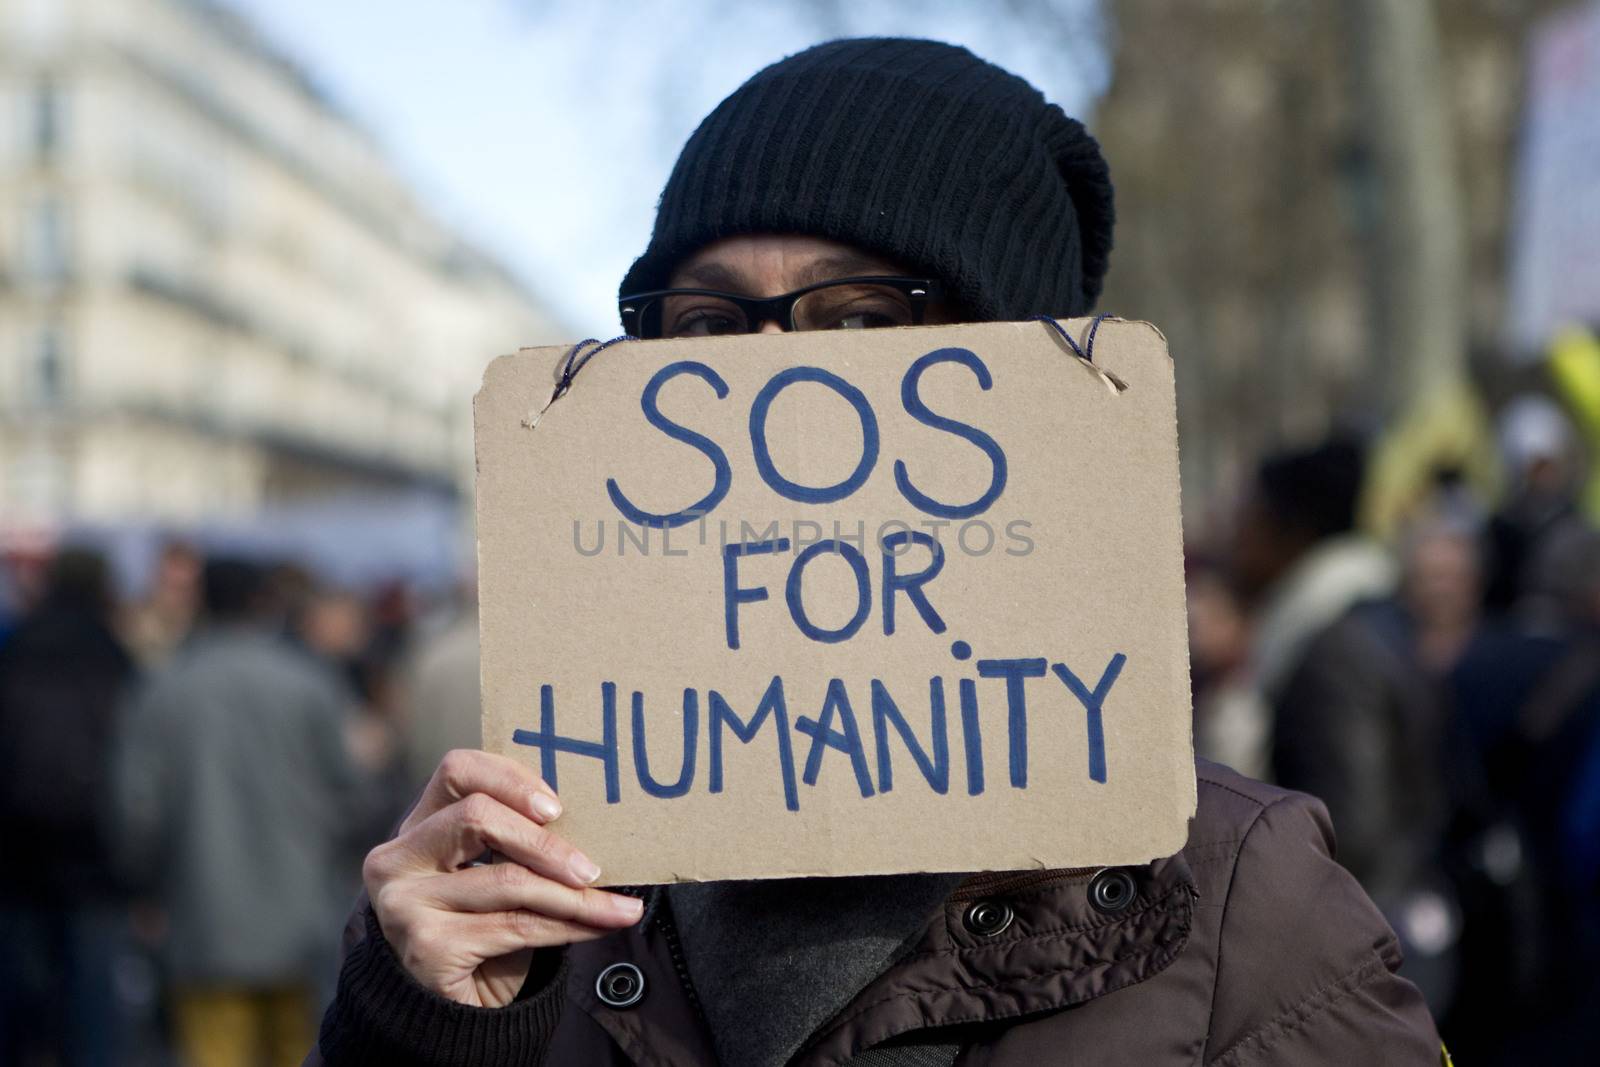 FRANCE, Paris: A woman holds a sign as hundreds of protesters gather on the Place de La Republique in Paris as part of demonstrations by the Nuit Debout (Up All Night) movement, on April 11, 2016. French Prime Minister Manuel Valls unveiled measures to help young people find work, aiming to quell weeks of protests against the government's proposed reforms to labour laws. Young people have been at the forefront of mass demonstrations against the reforms over the past month, which the government argues are aimed at making France's rigid labour market more flexible.